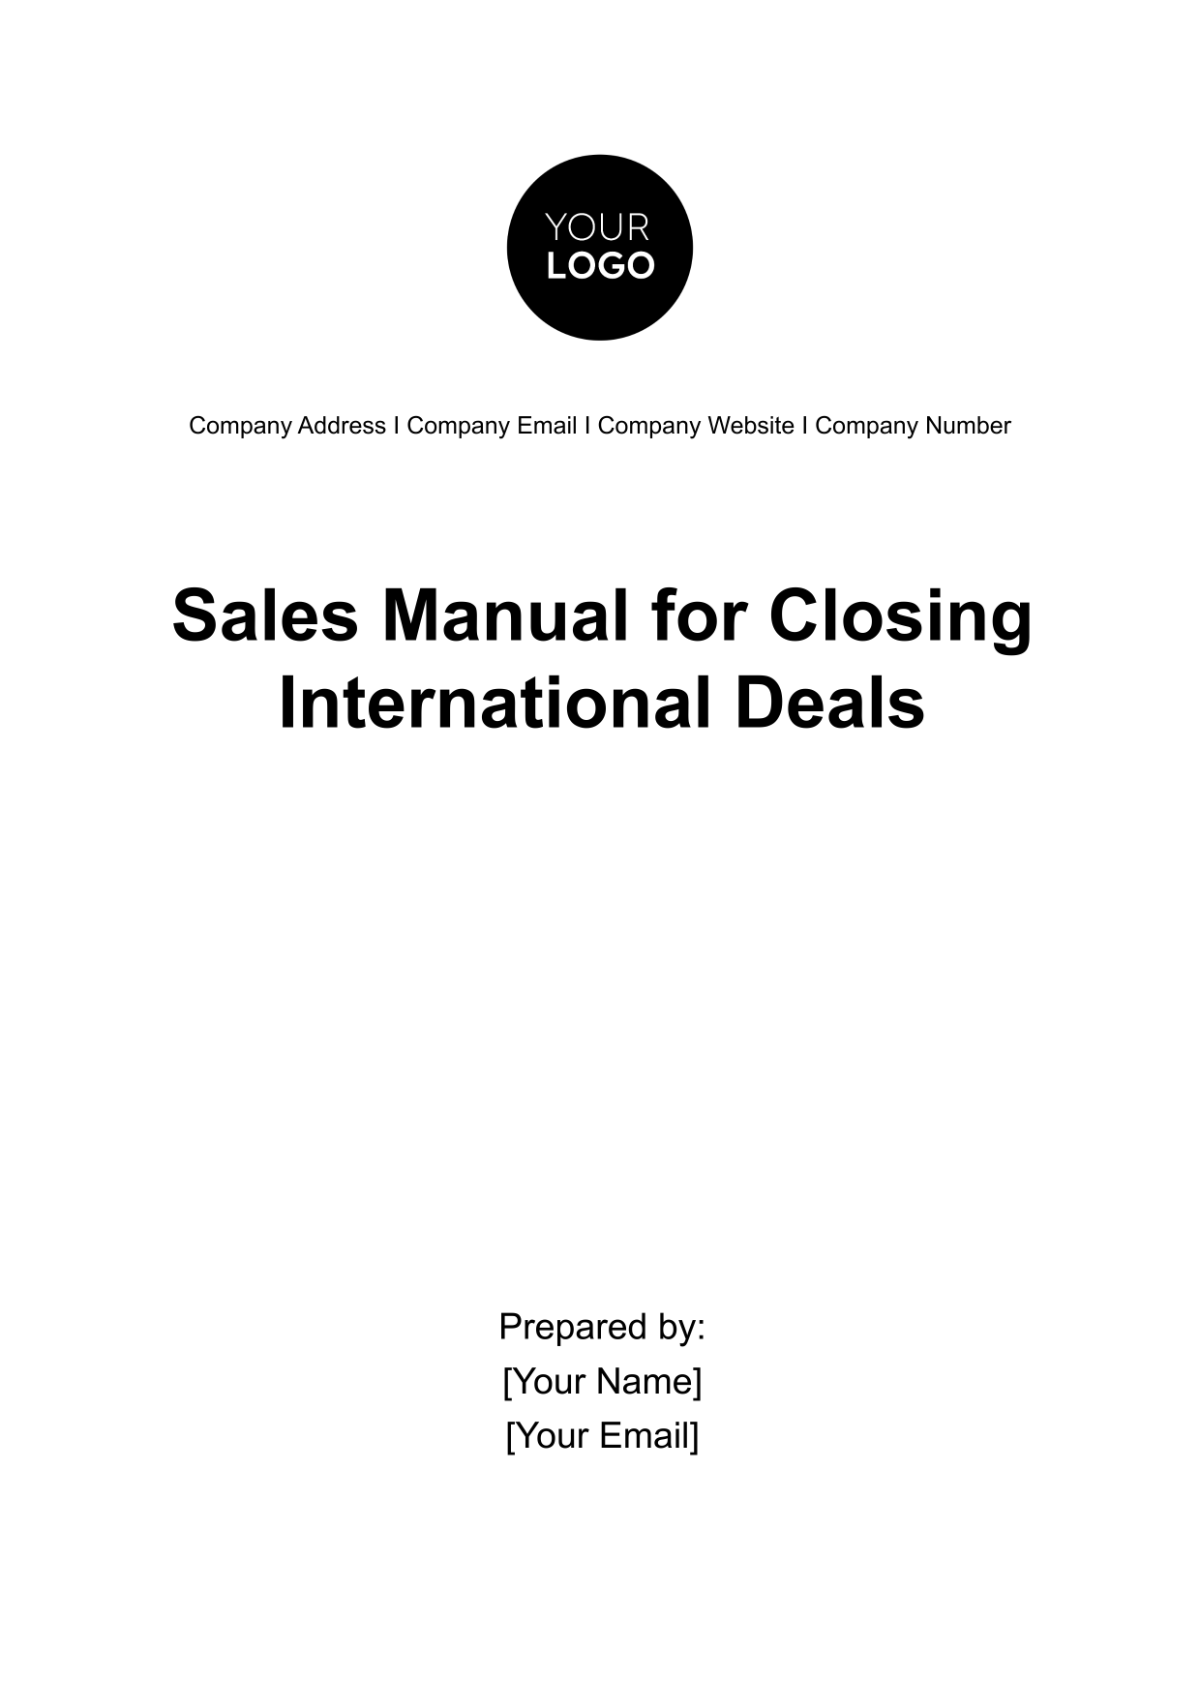 Free Sales Manual for Closing International Deals Template